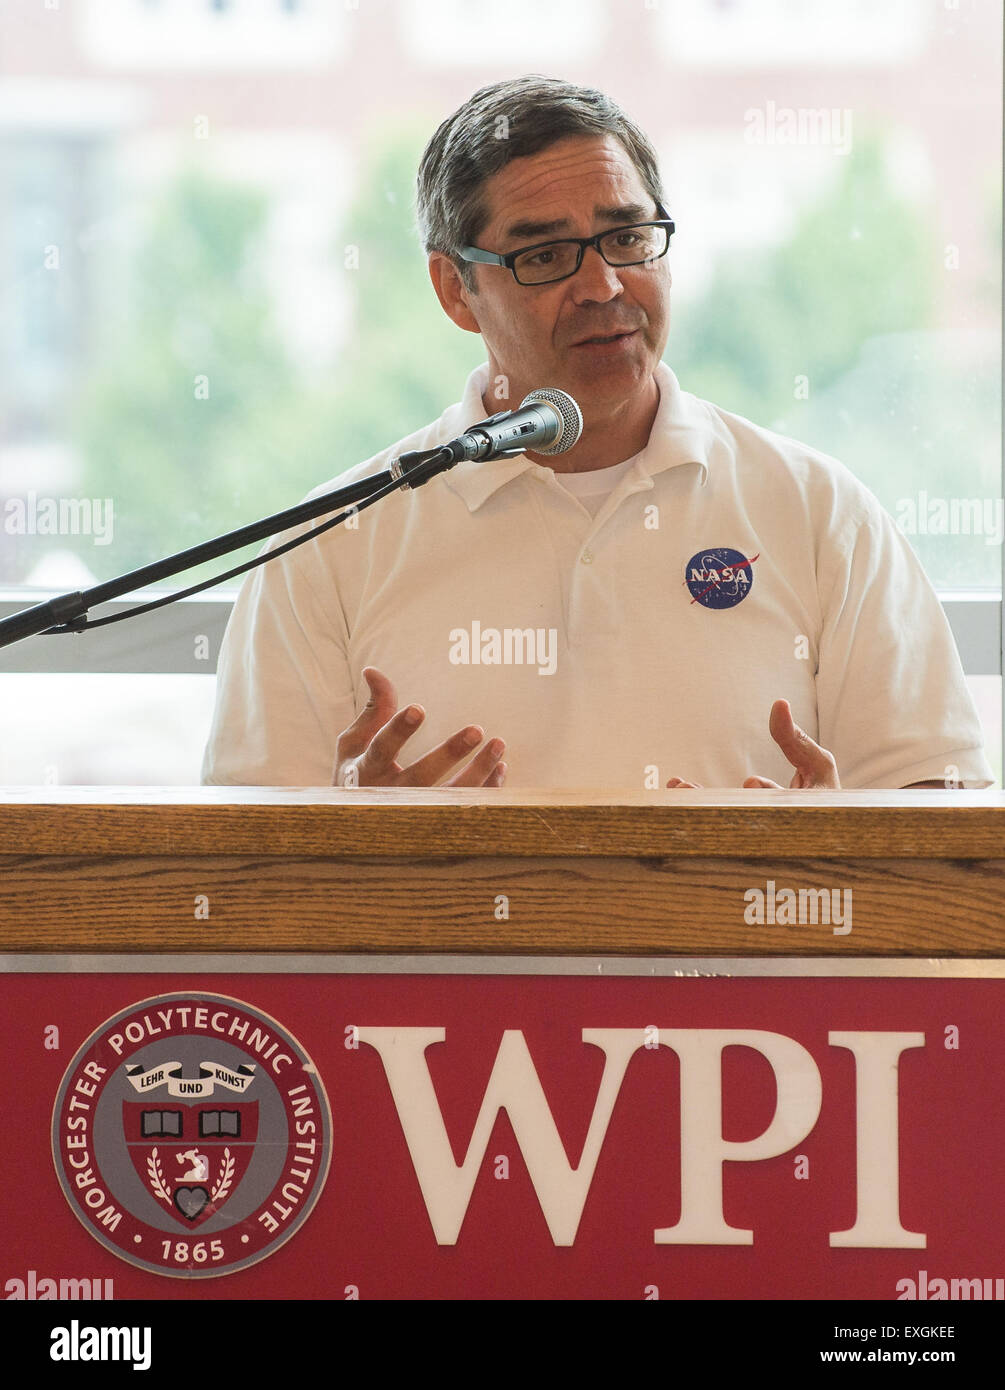 Sam Ortega, program manager for Centennial Challenges at NASA speaks at a luncheon during the TouchTomorrow Festival, held in conjunction with the 2015 Sample Return Robot Challenge, Saturday, June 13, 2015 at the Worcester Polytechnic Institute (WPI) in Worcester, Mass.  Sixteen teams competed for a $1.5 million NASA prize purse. Teams will be required to demonstrate autonomous robots that can locate and collect samples from a wide and varied terrain, operating without human control. The objective of this NASA-WPI Centennial Challenge is to encourage innovations in autonomous navigation and r Stock Photo